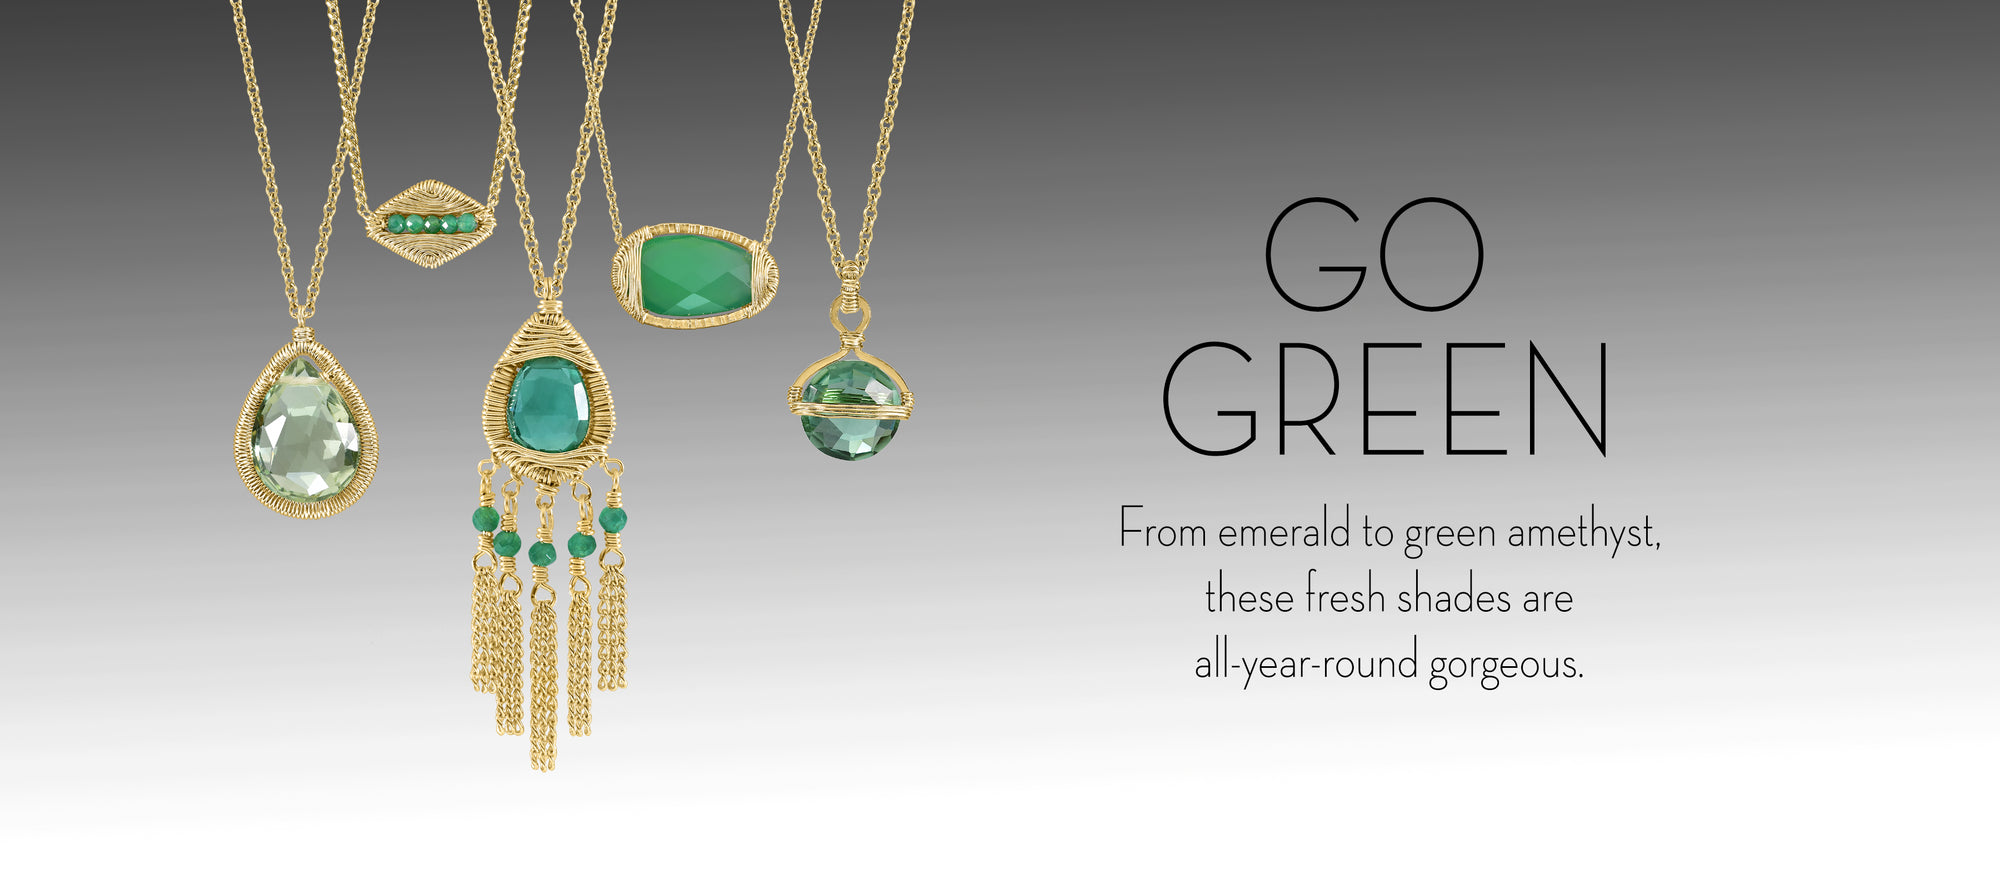 Go Green. From emerald to green amethyst, these fresh shades are all year around gorgeous.